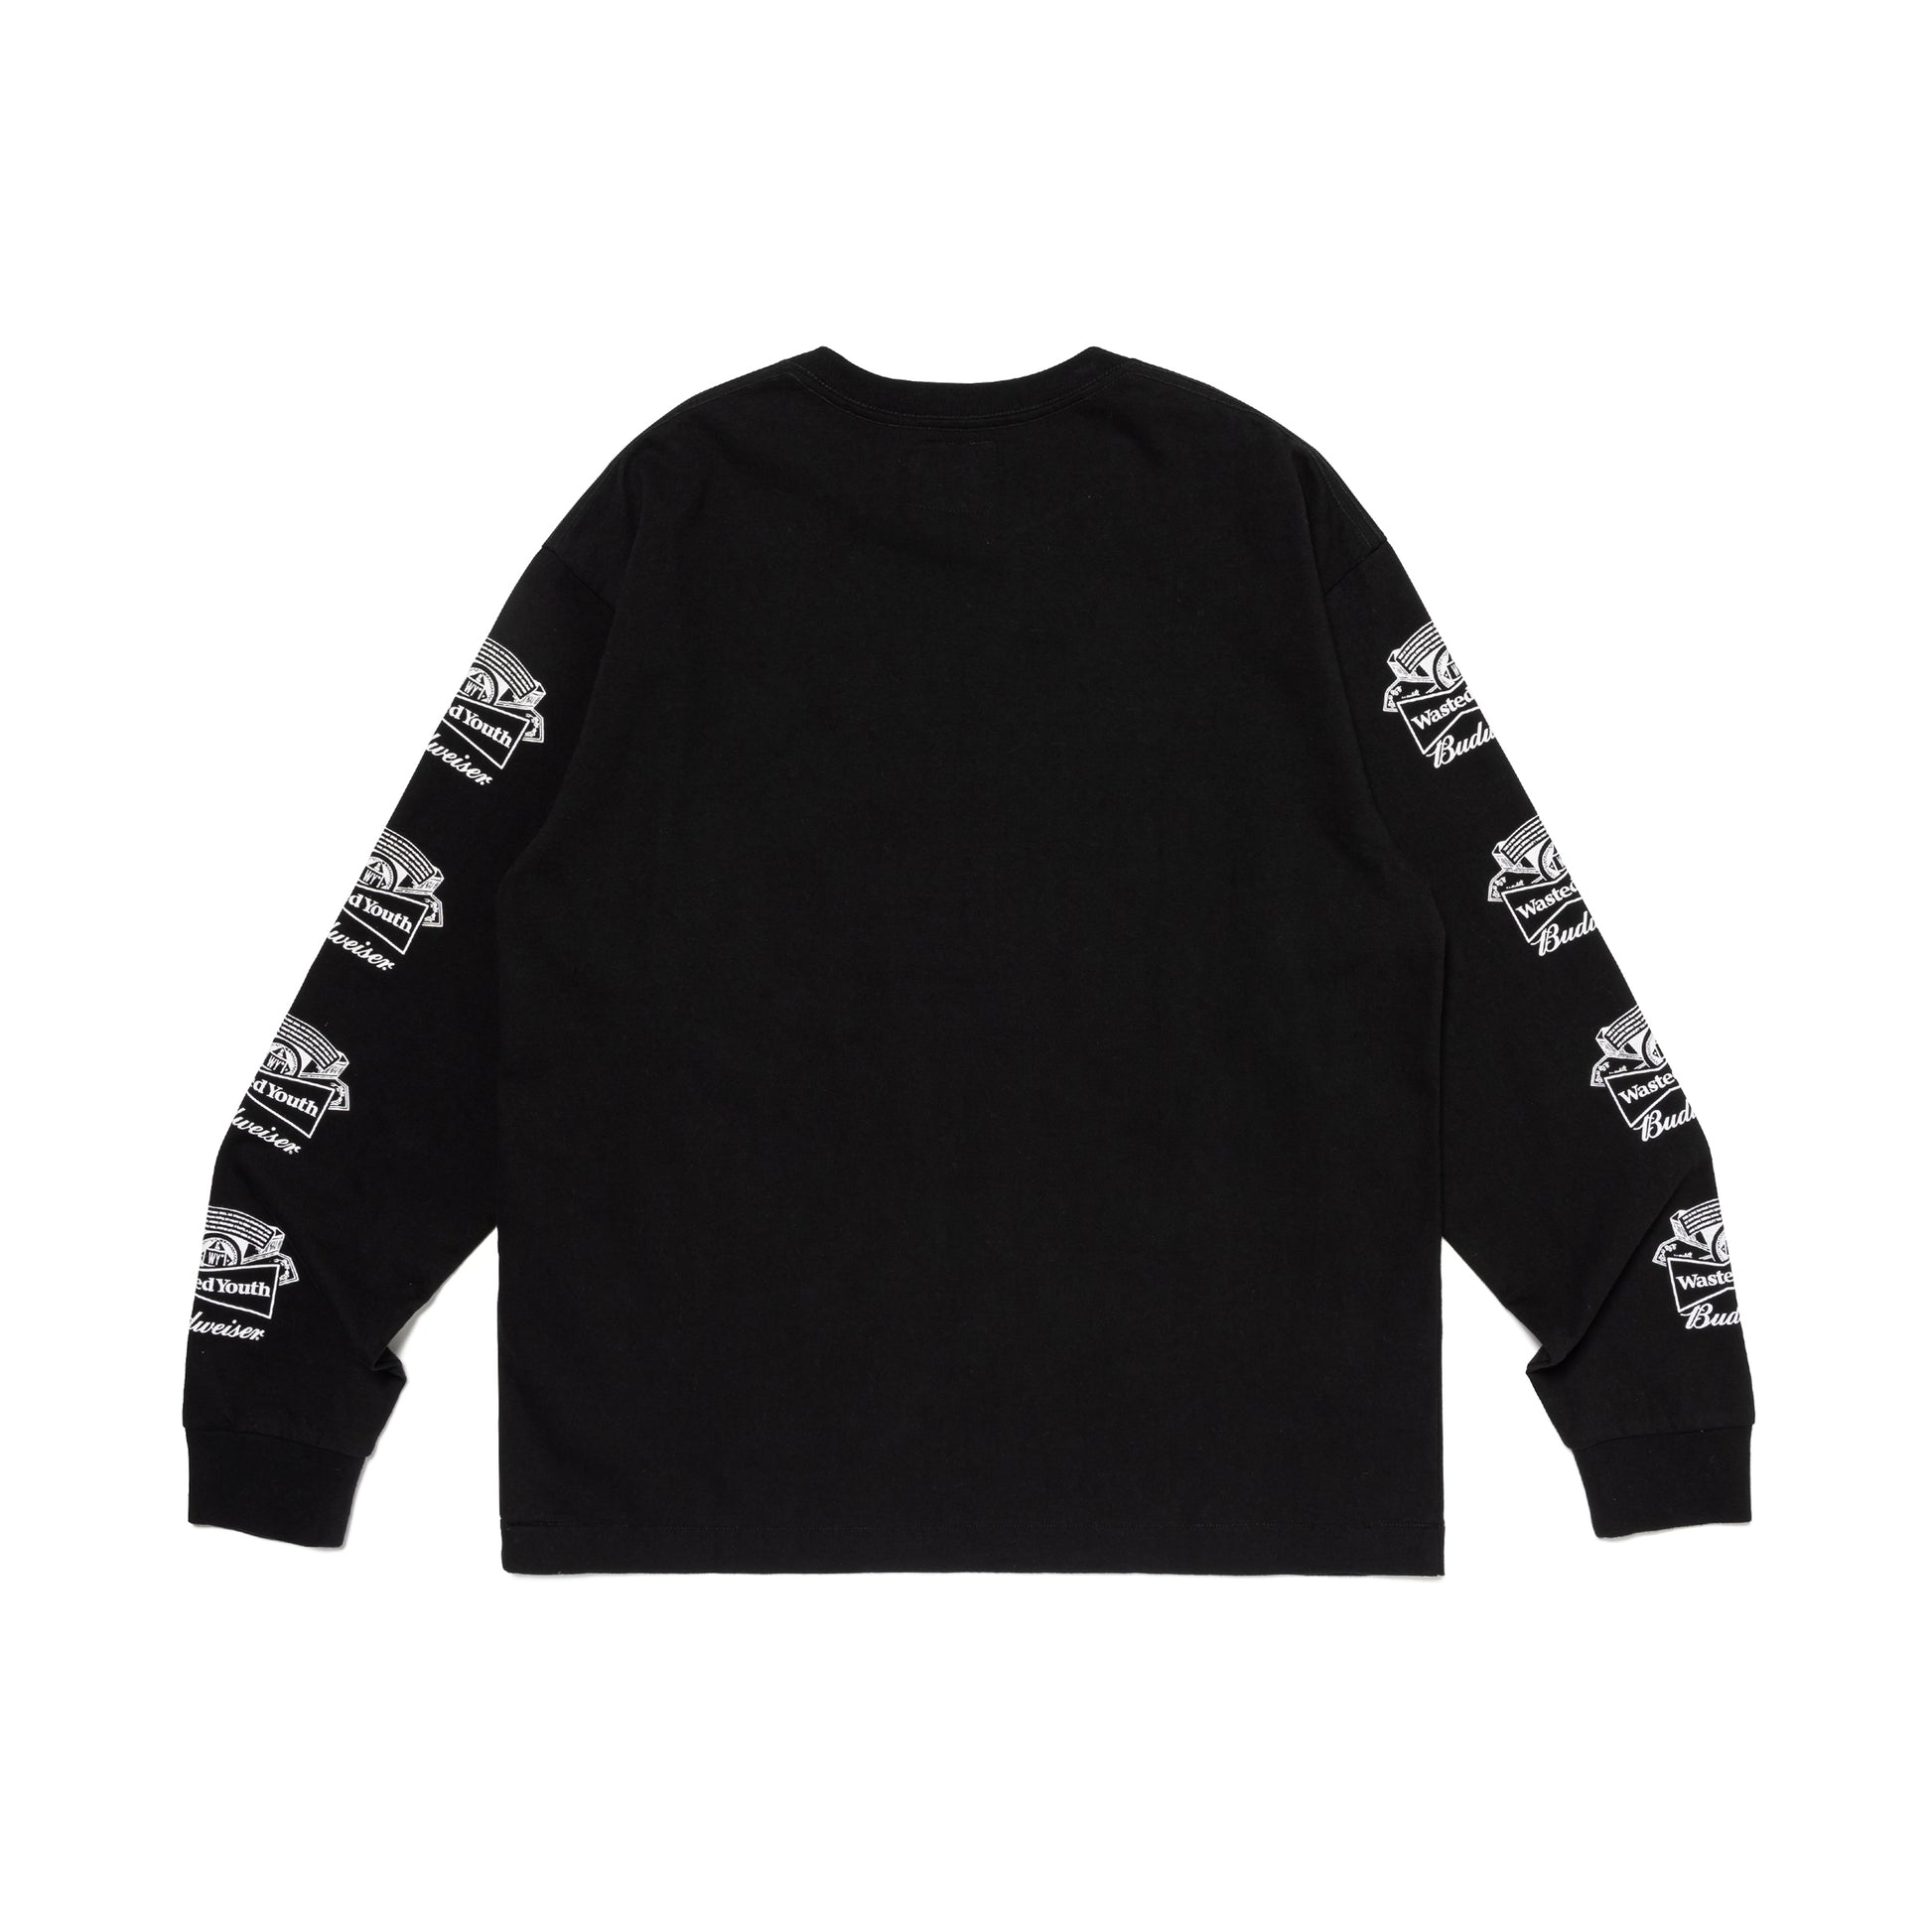 wasted youth LONG SLEEVE T-SHIRT白 verdy - fountainheadsolution.com